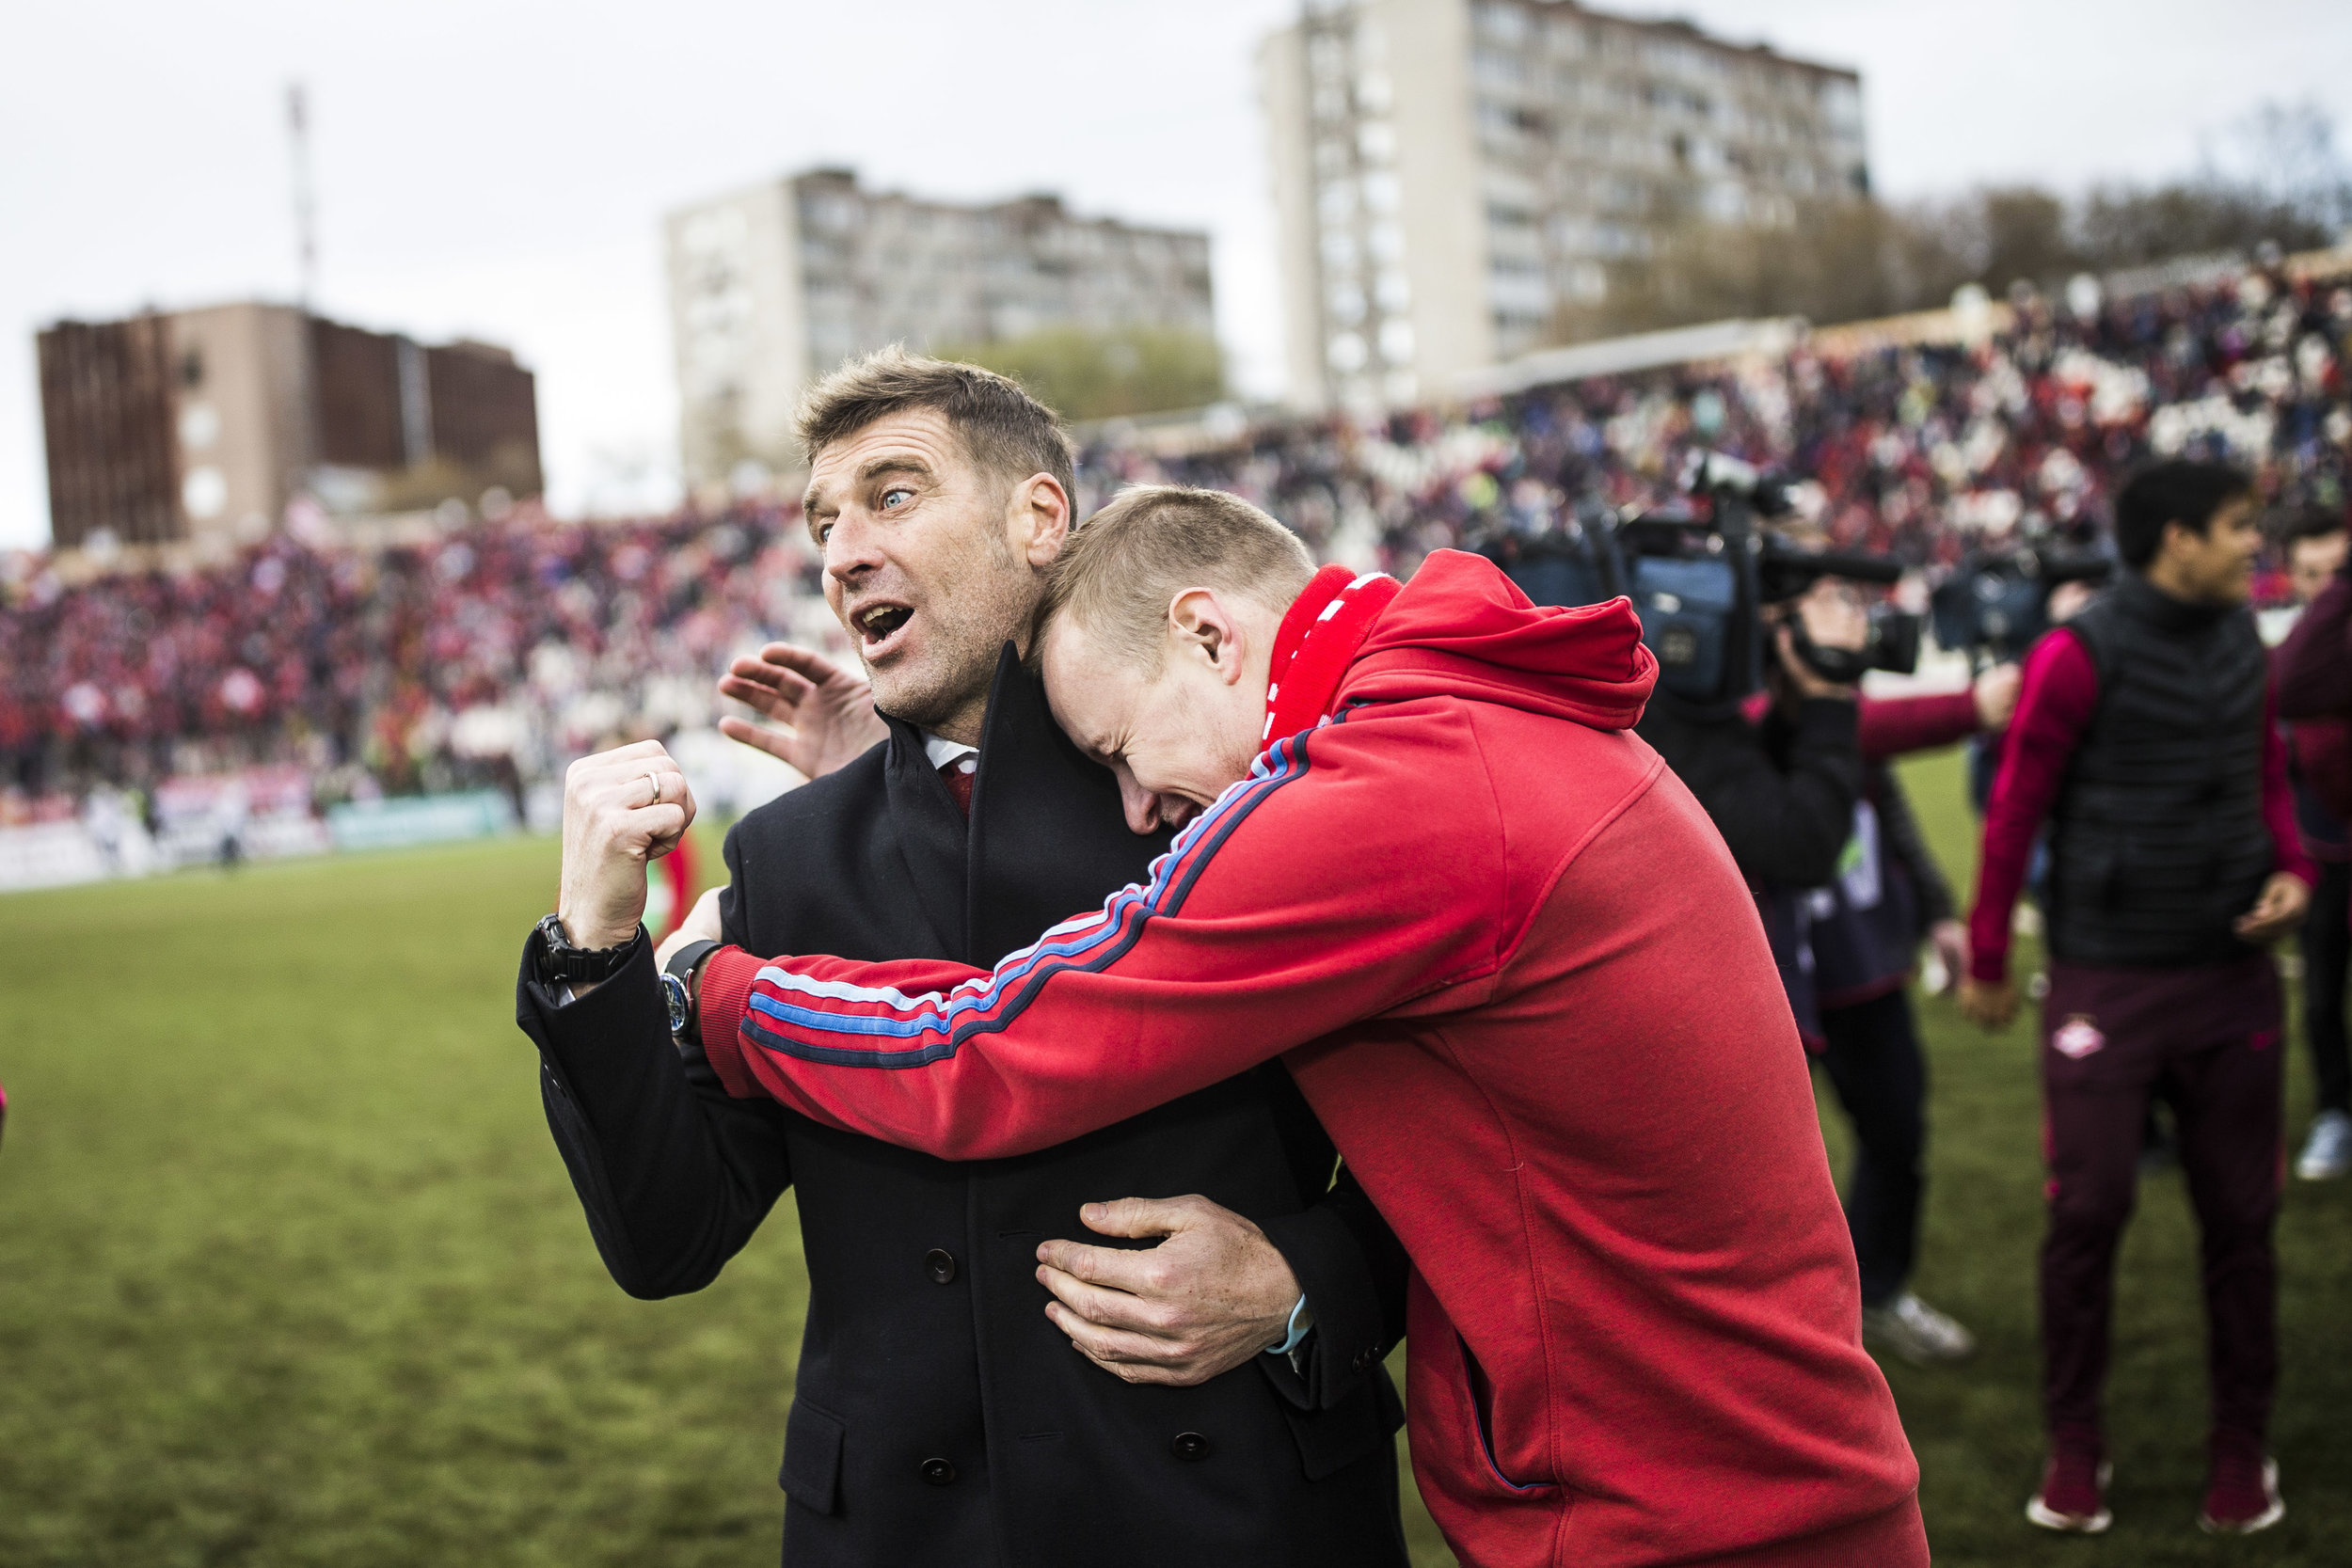  Spartak Moscow fan, who ran off the stands onto the pitch, hugs team's head coach Massimo Carrera after a league game in Perm. A few days ago Spartak became the league champion for the first time in 16 years. May 13th, 2017 